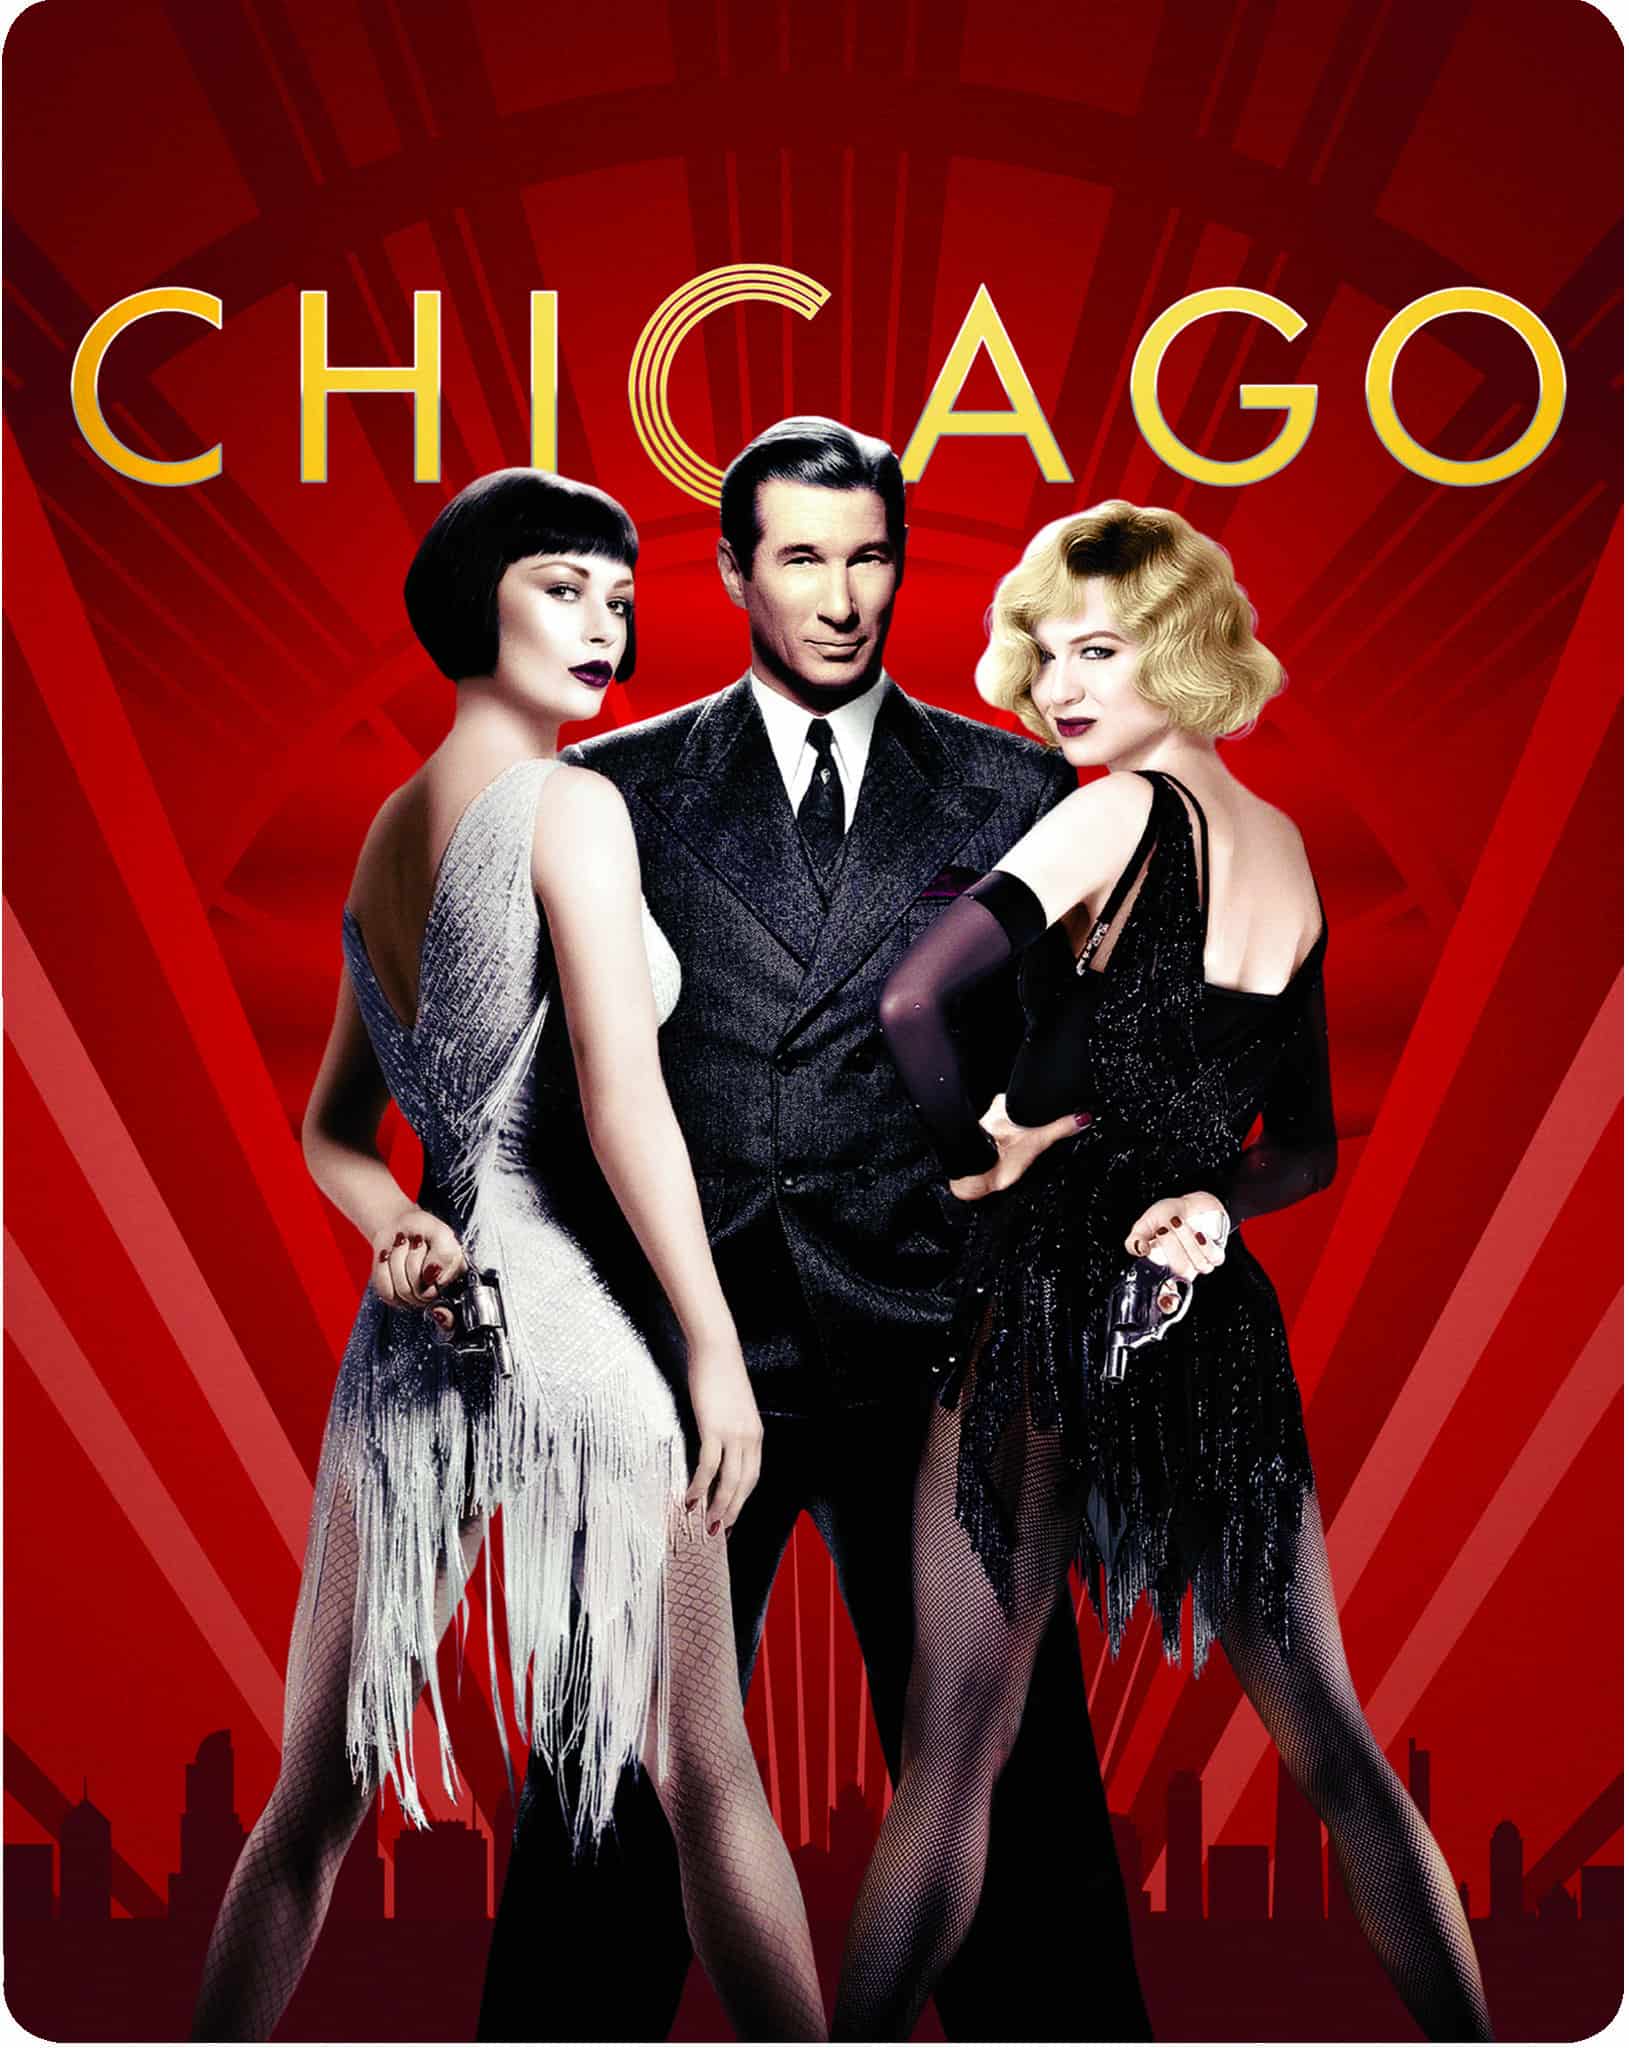 Chicago turns 20 with a Blu-ray steelbook 3